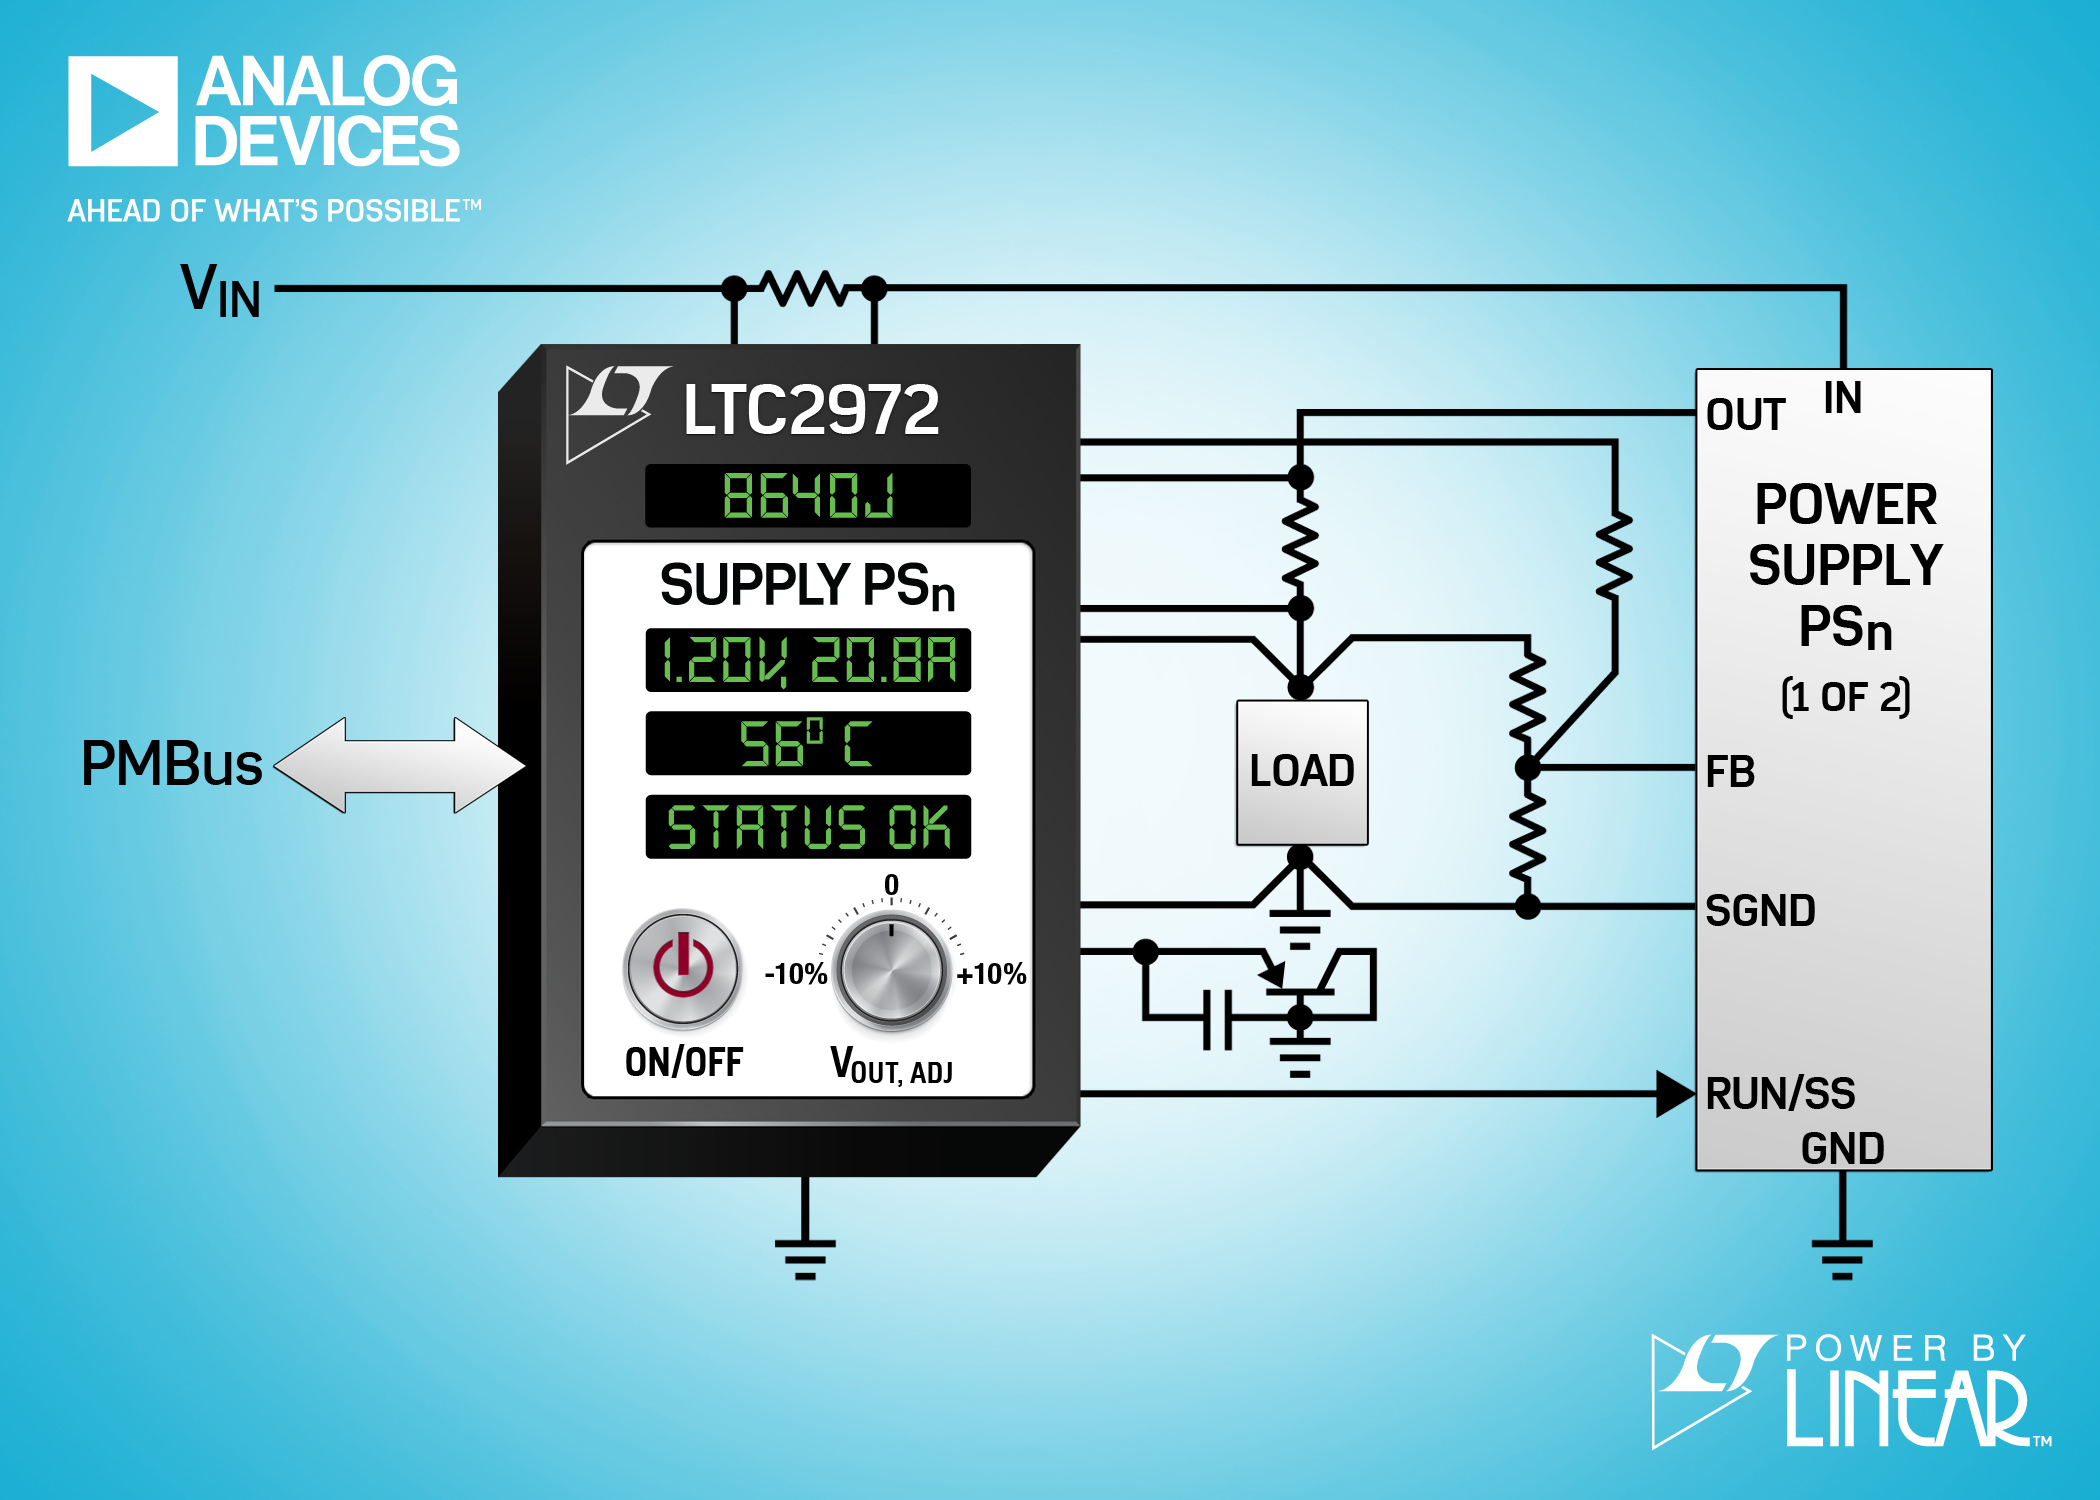 Two-channel power system monitors current, power and energy